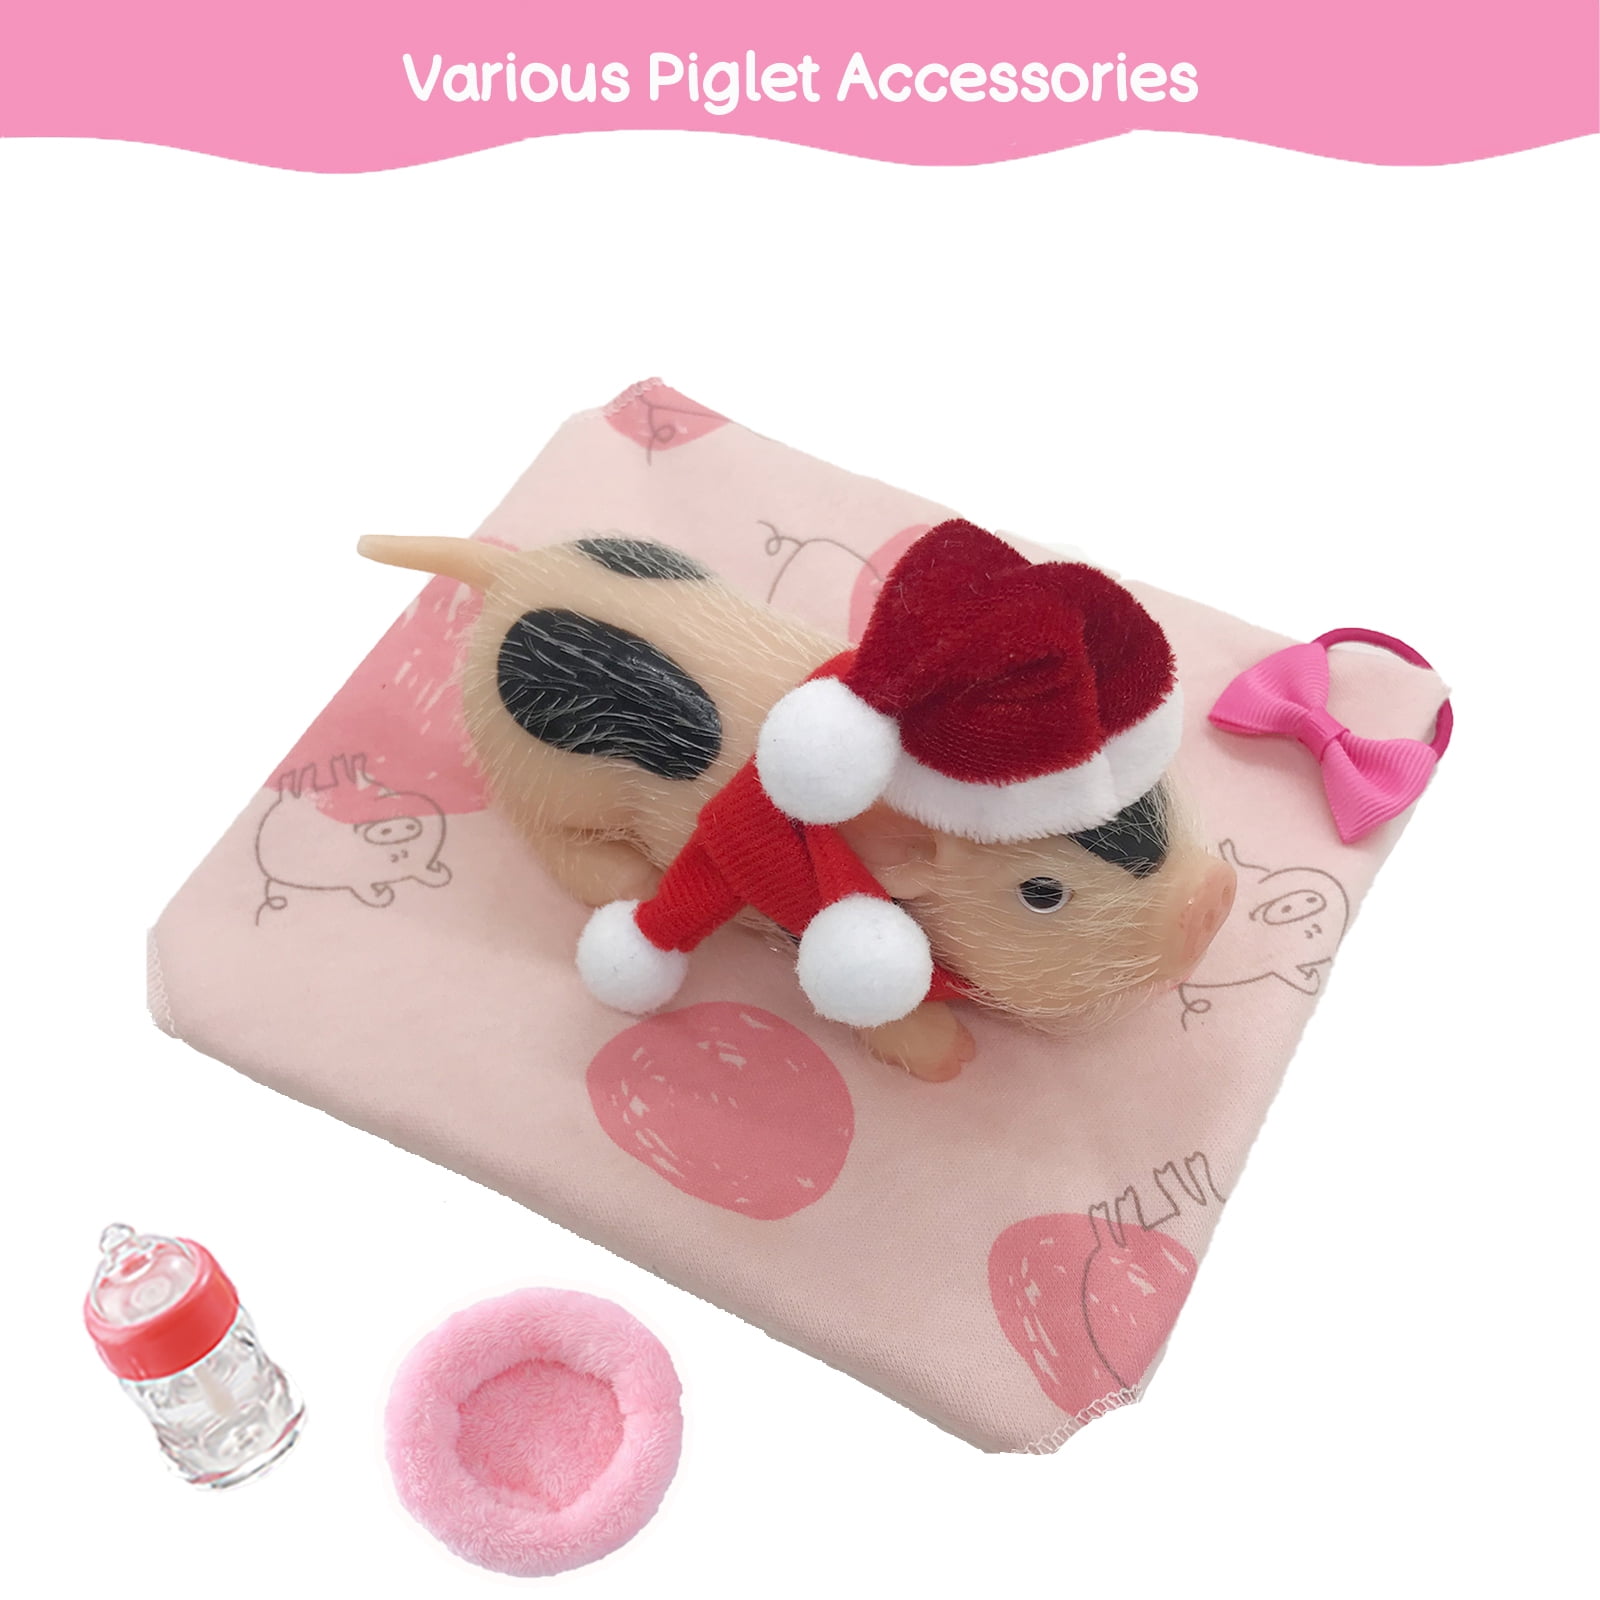 VOLOBE 5 Inches Silicone Piglet, Soft Mini Realistic Silicone Animals, Gift  Box with Amazing Silicone Piglet Accessories, Kids Lifelike Reborn